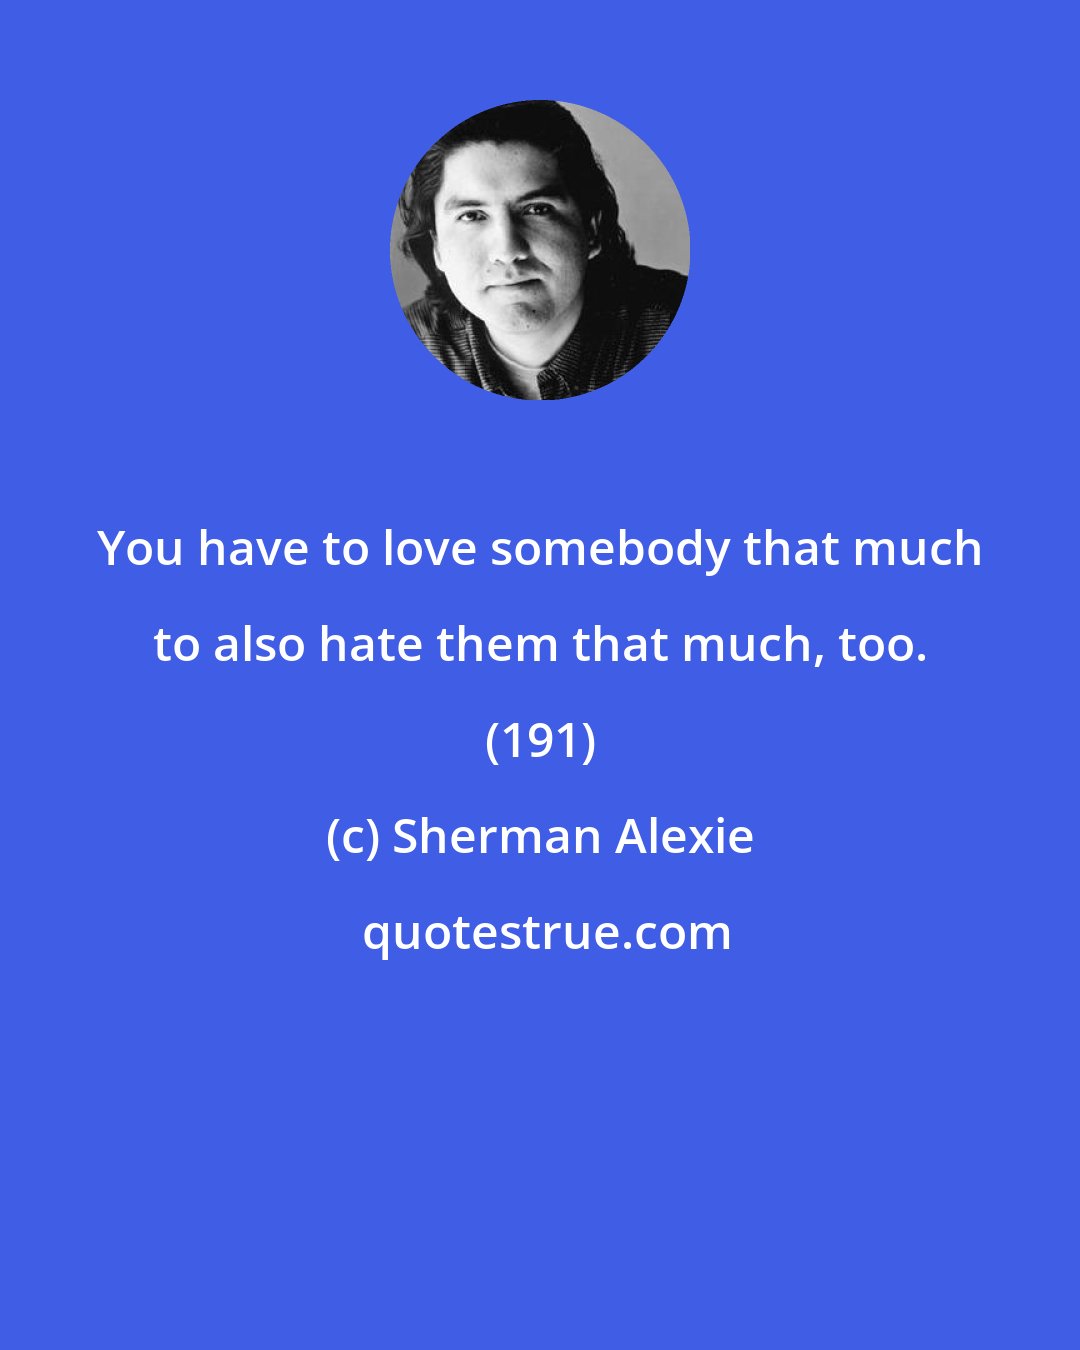 Sherman Alexie: You have to love somebody that much to also hate them that much, too. (191)